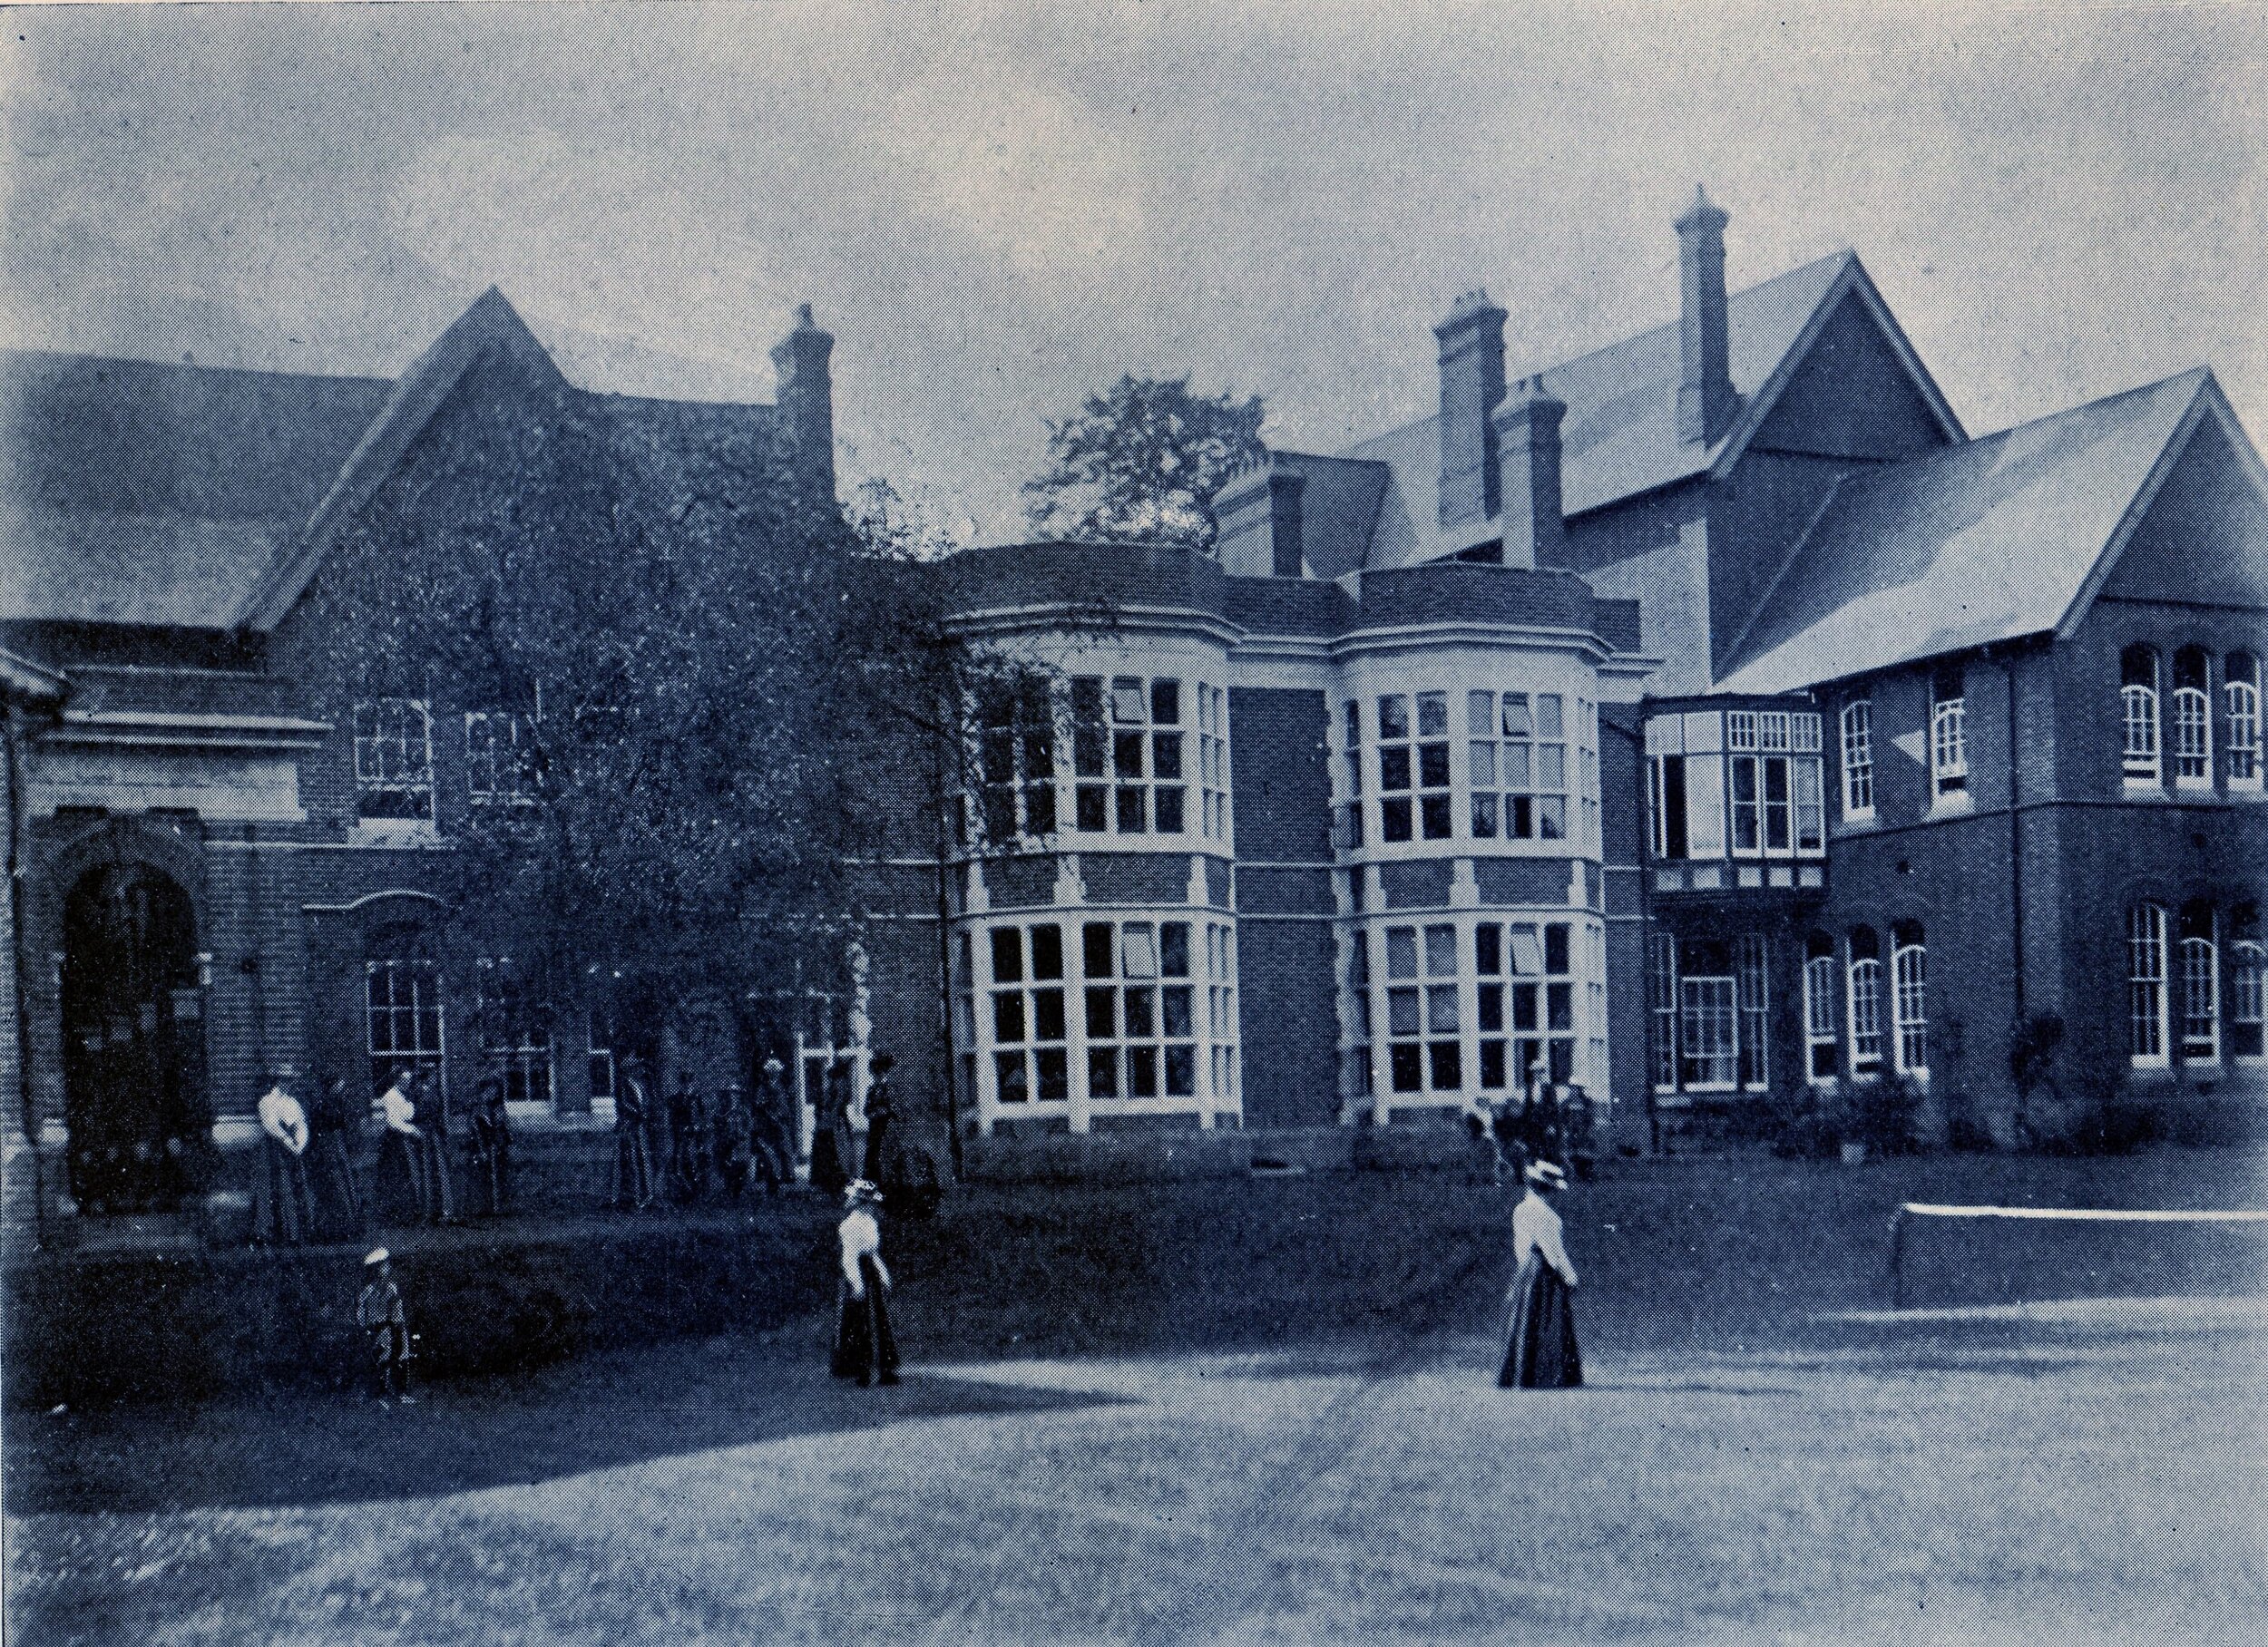  Winchester High School, before the name was changed to St Swithun’s, in 1900 